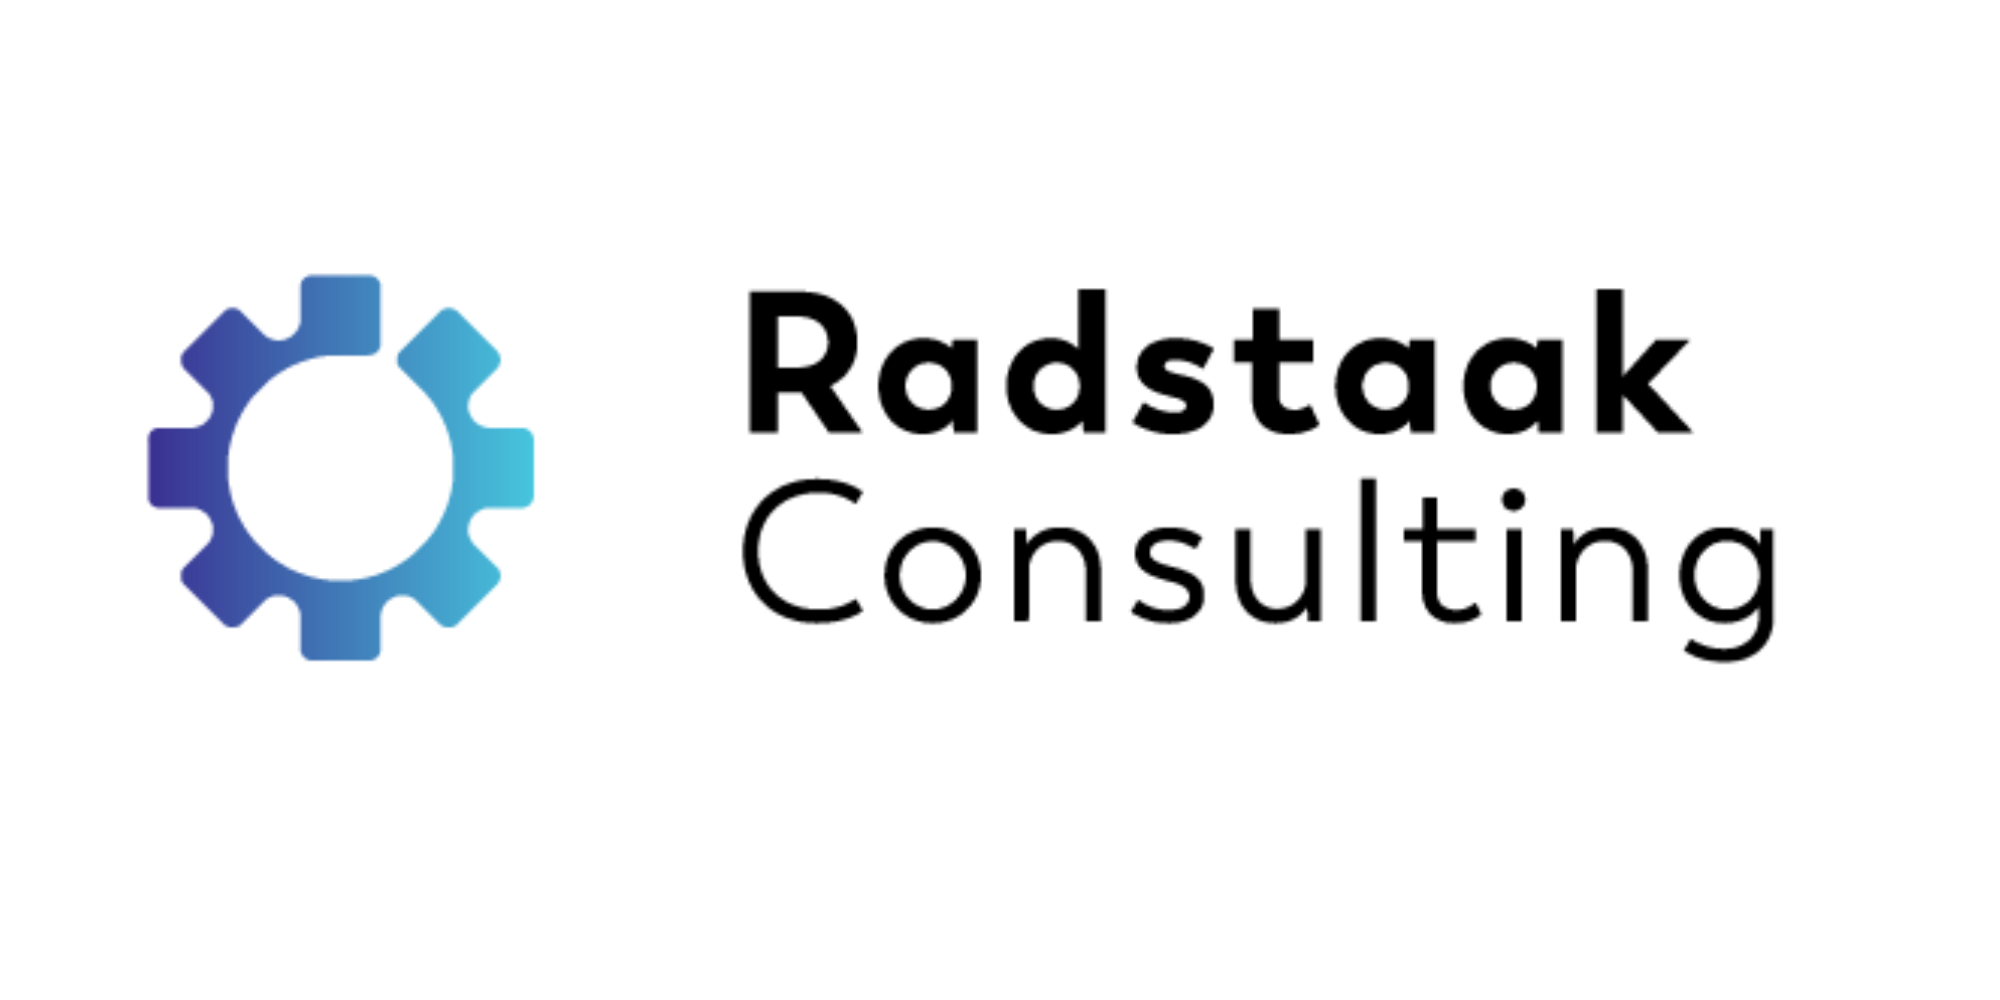 Radstaak Consulting